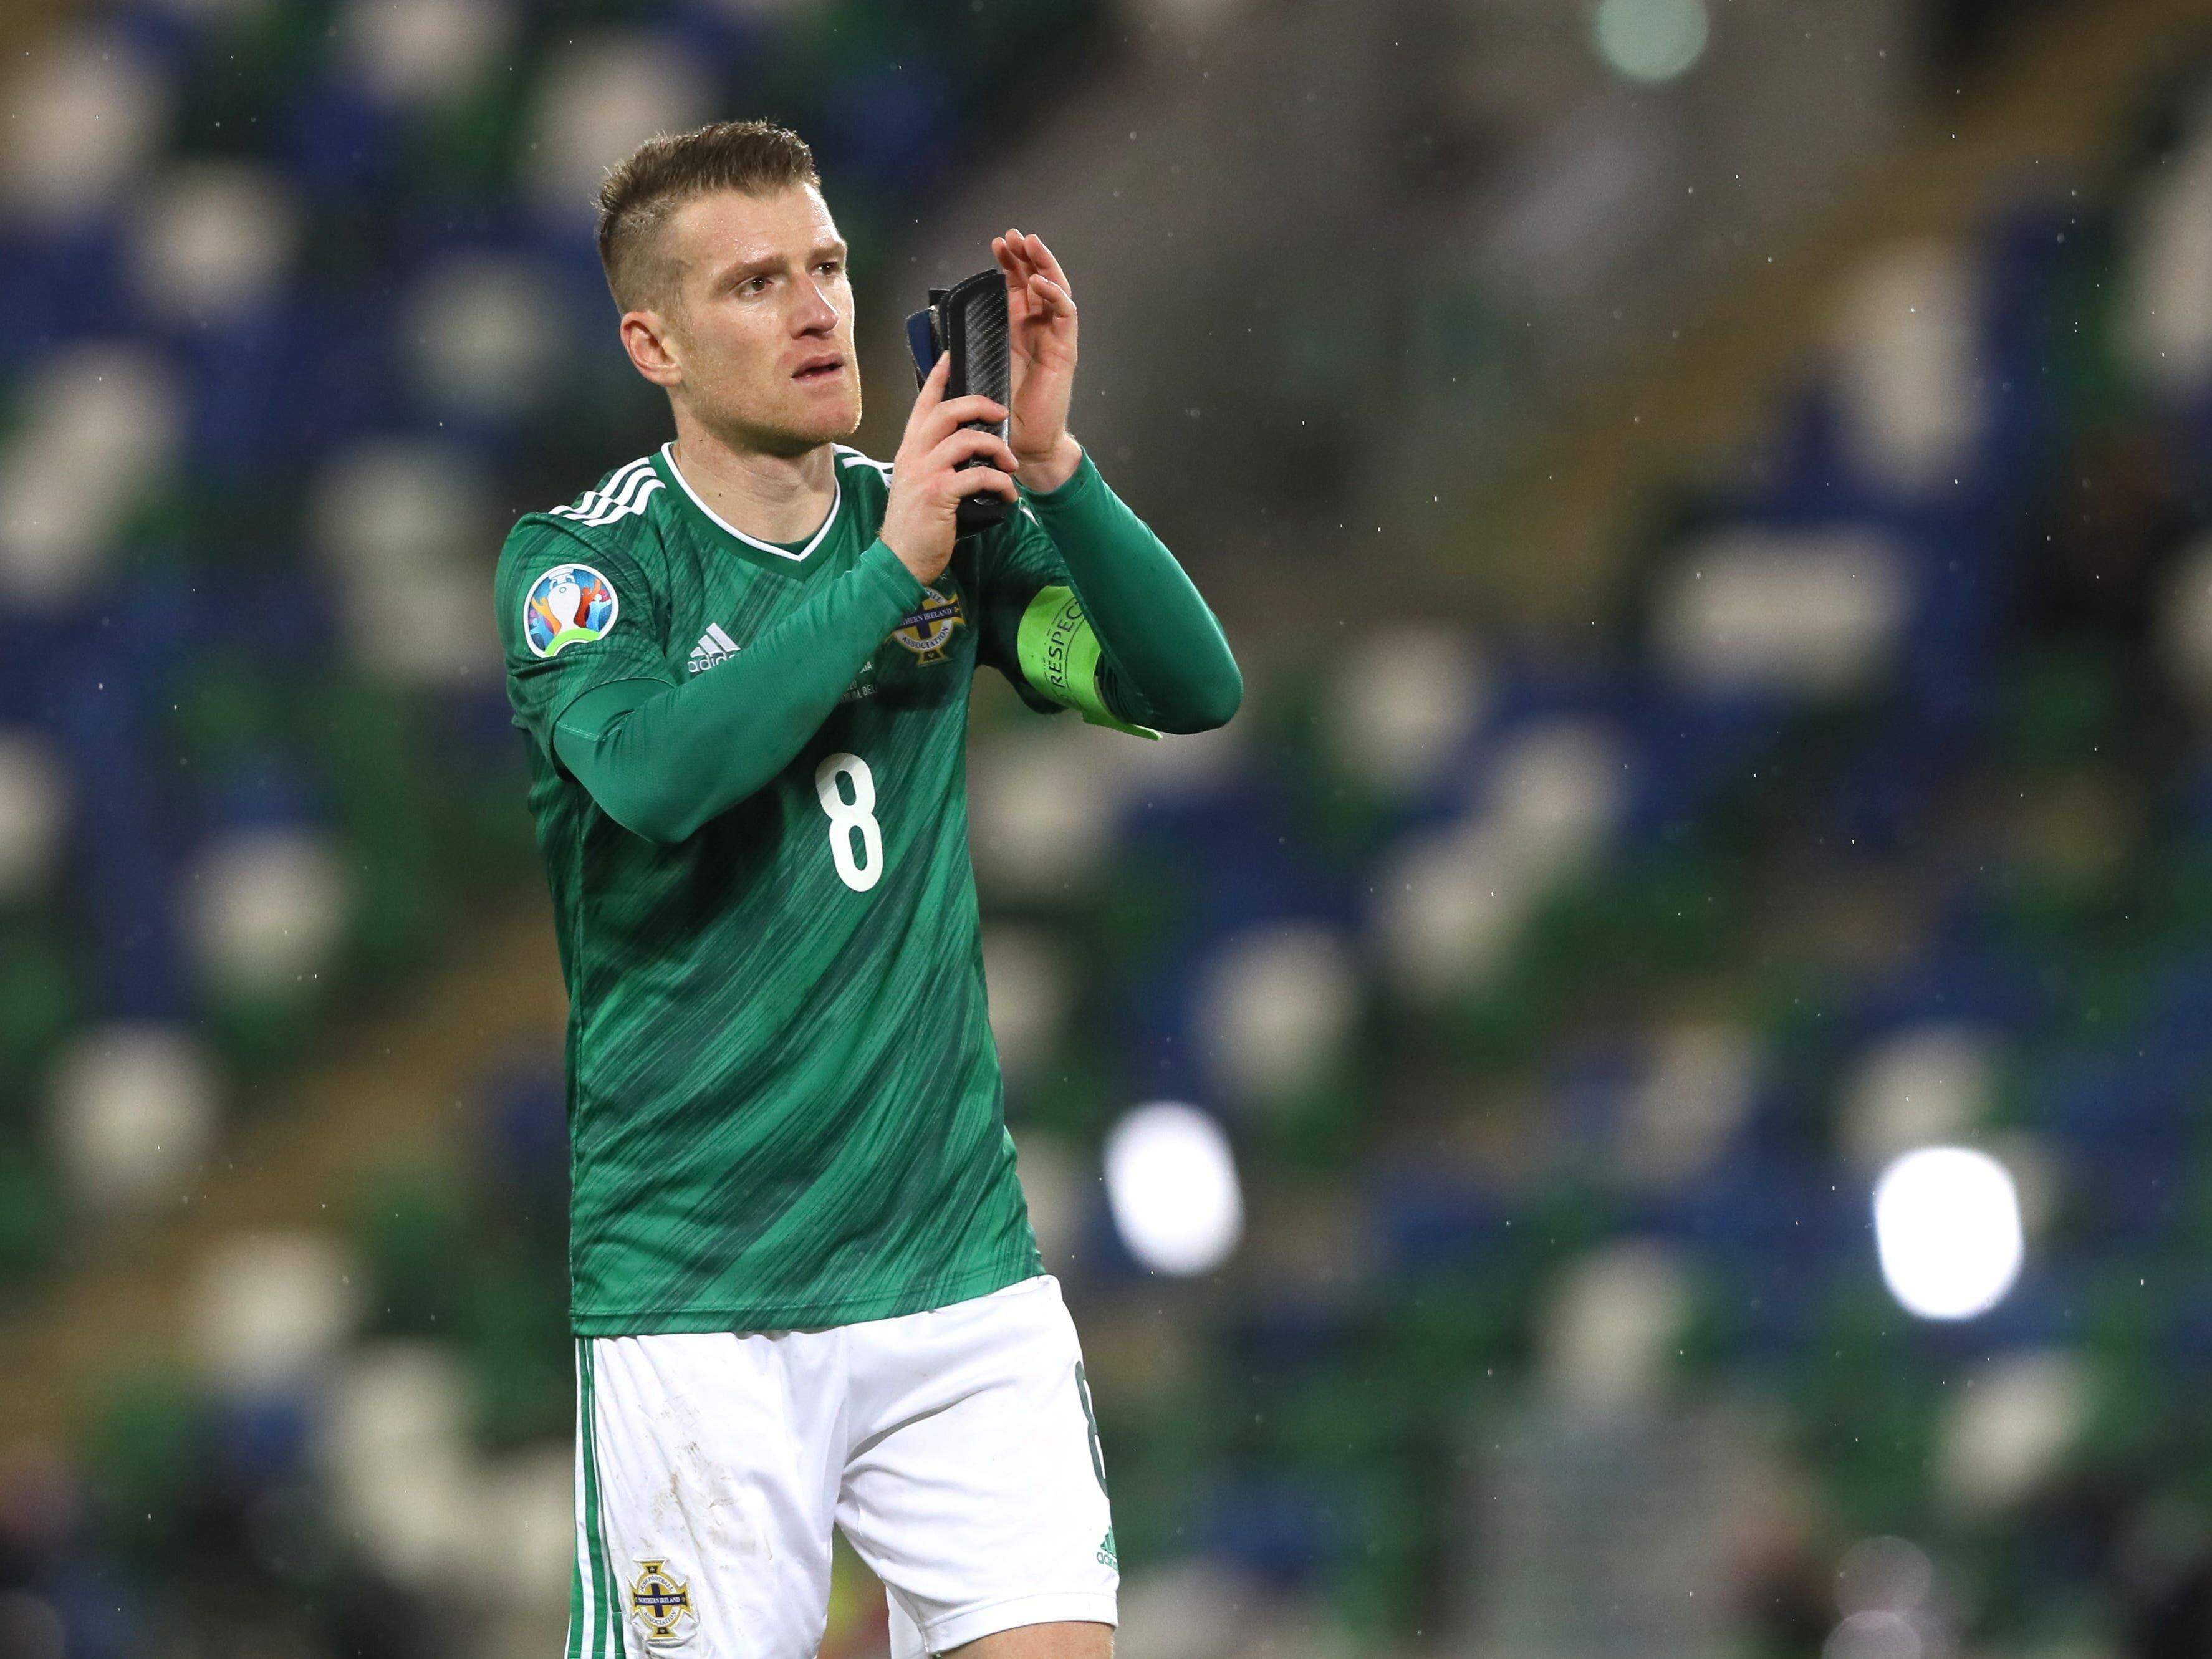 Ian Baraclough says people are writing Steven Davis off prematurely